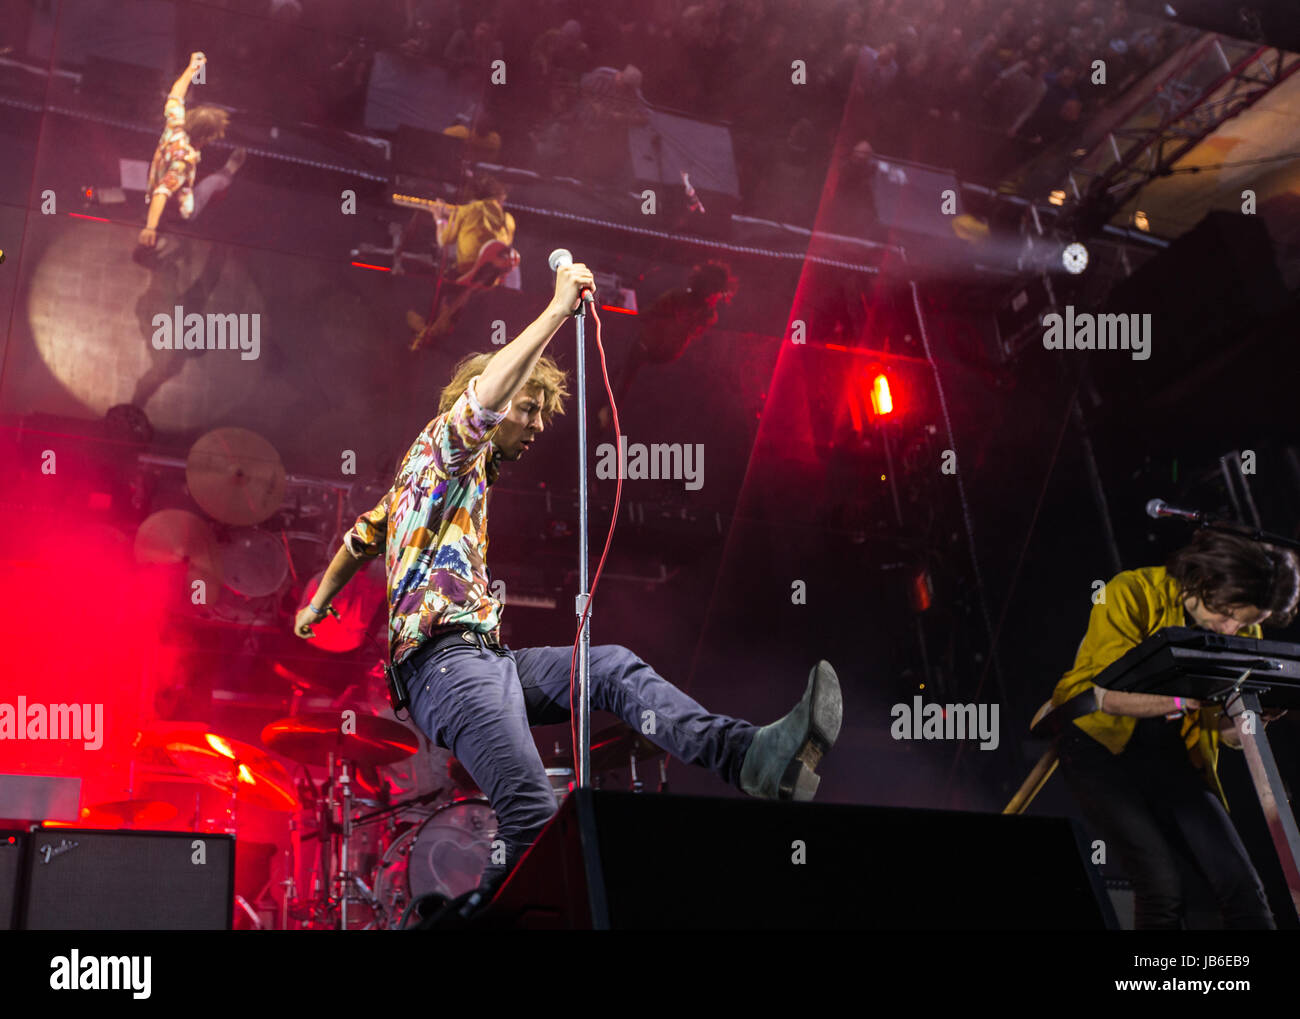 Phoenix Band High Resolution Stock Photography and Images - Alamy